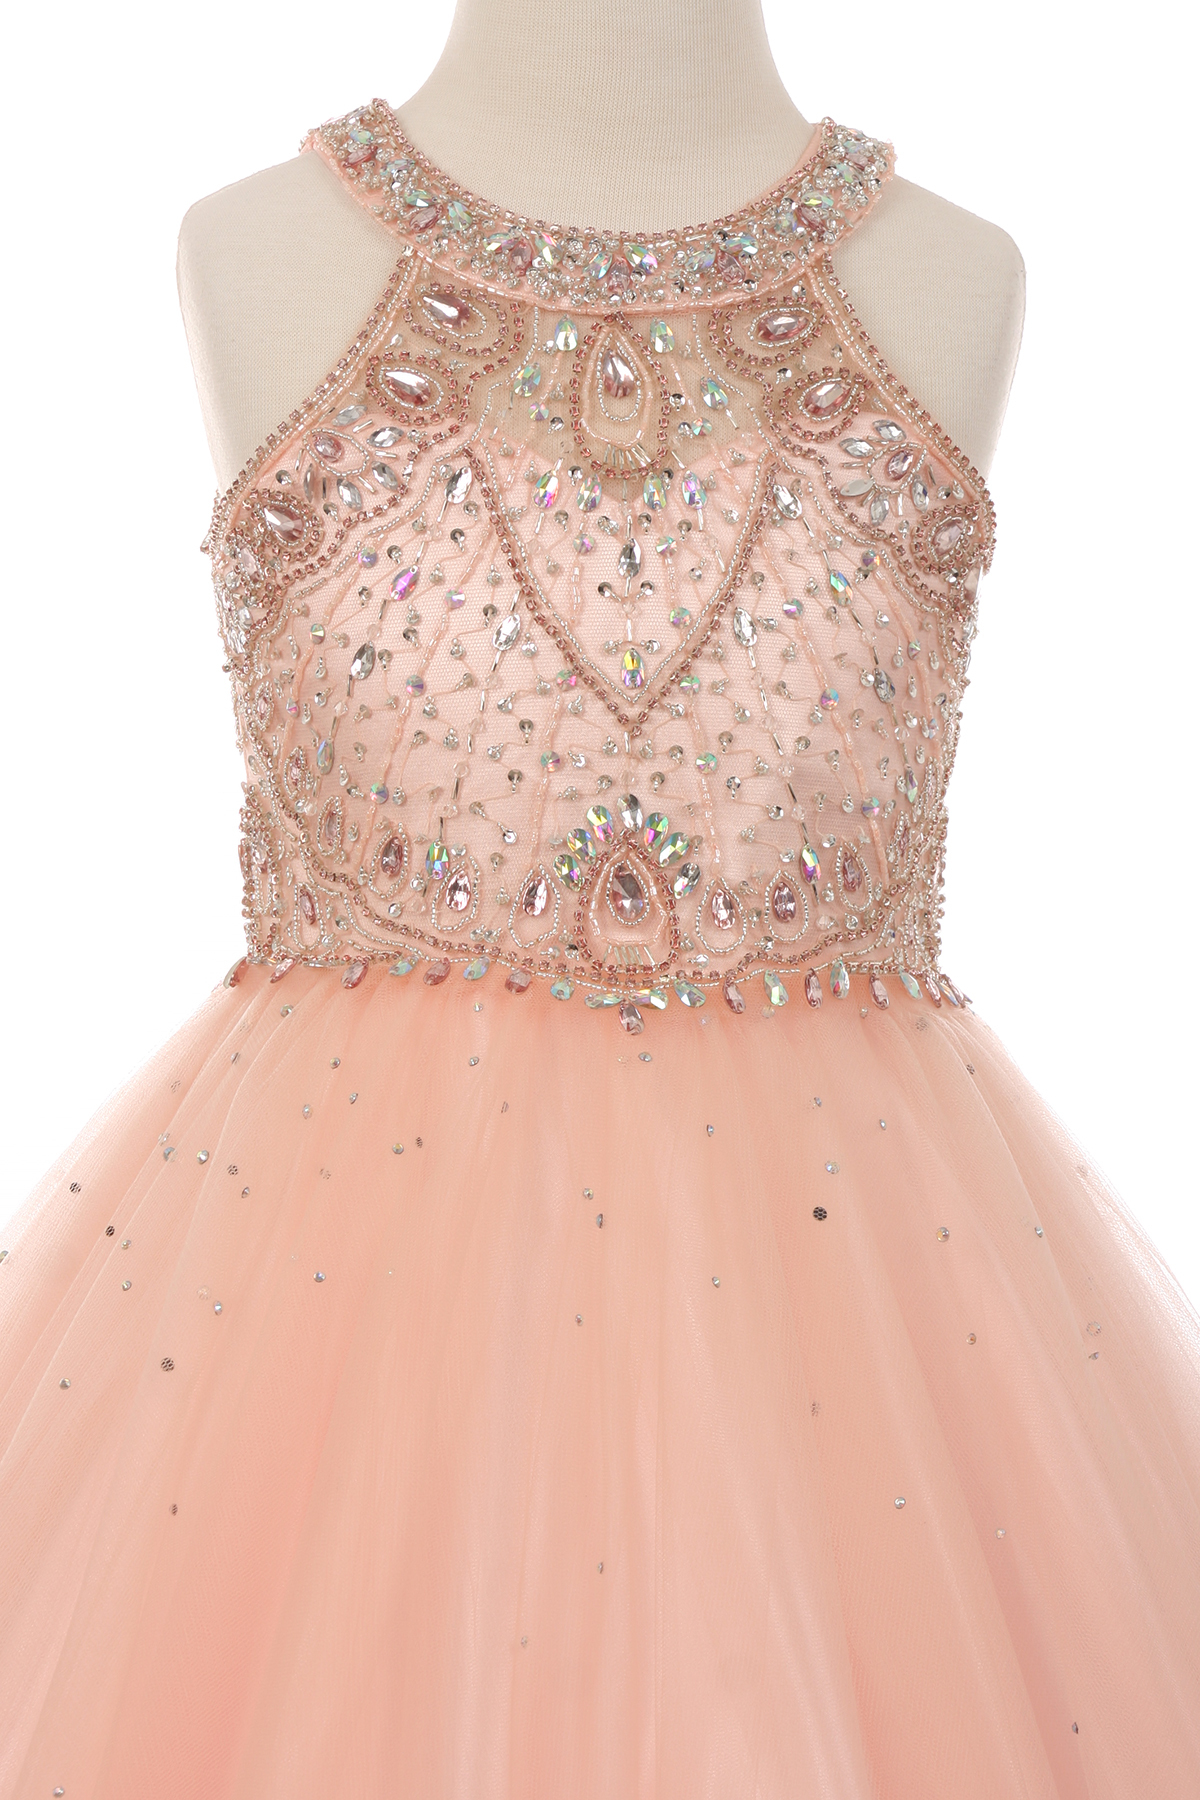 Blush  rhinestone halter neck party dress. Super soft tulle skirt with wire netting on the bottom.  